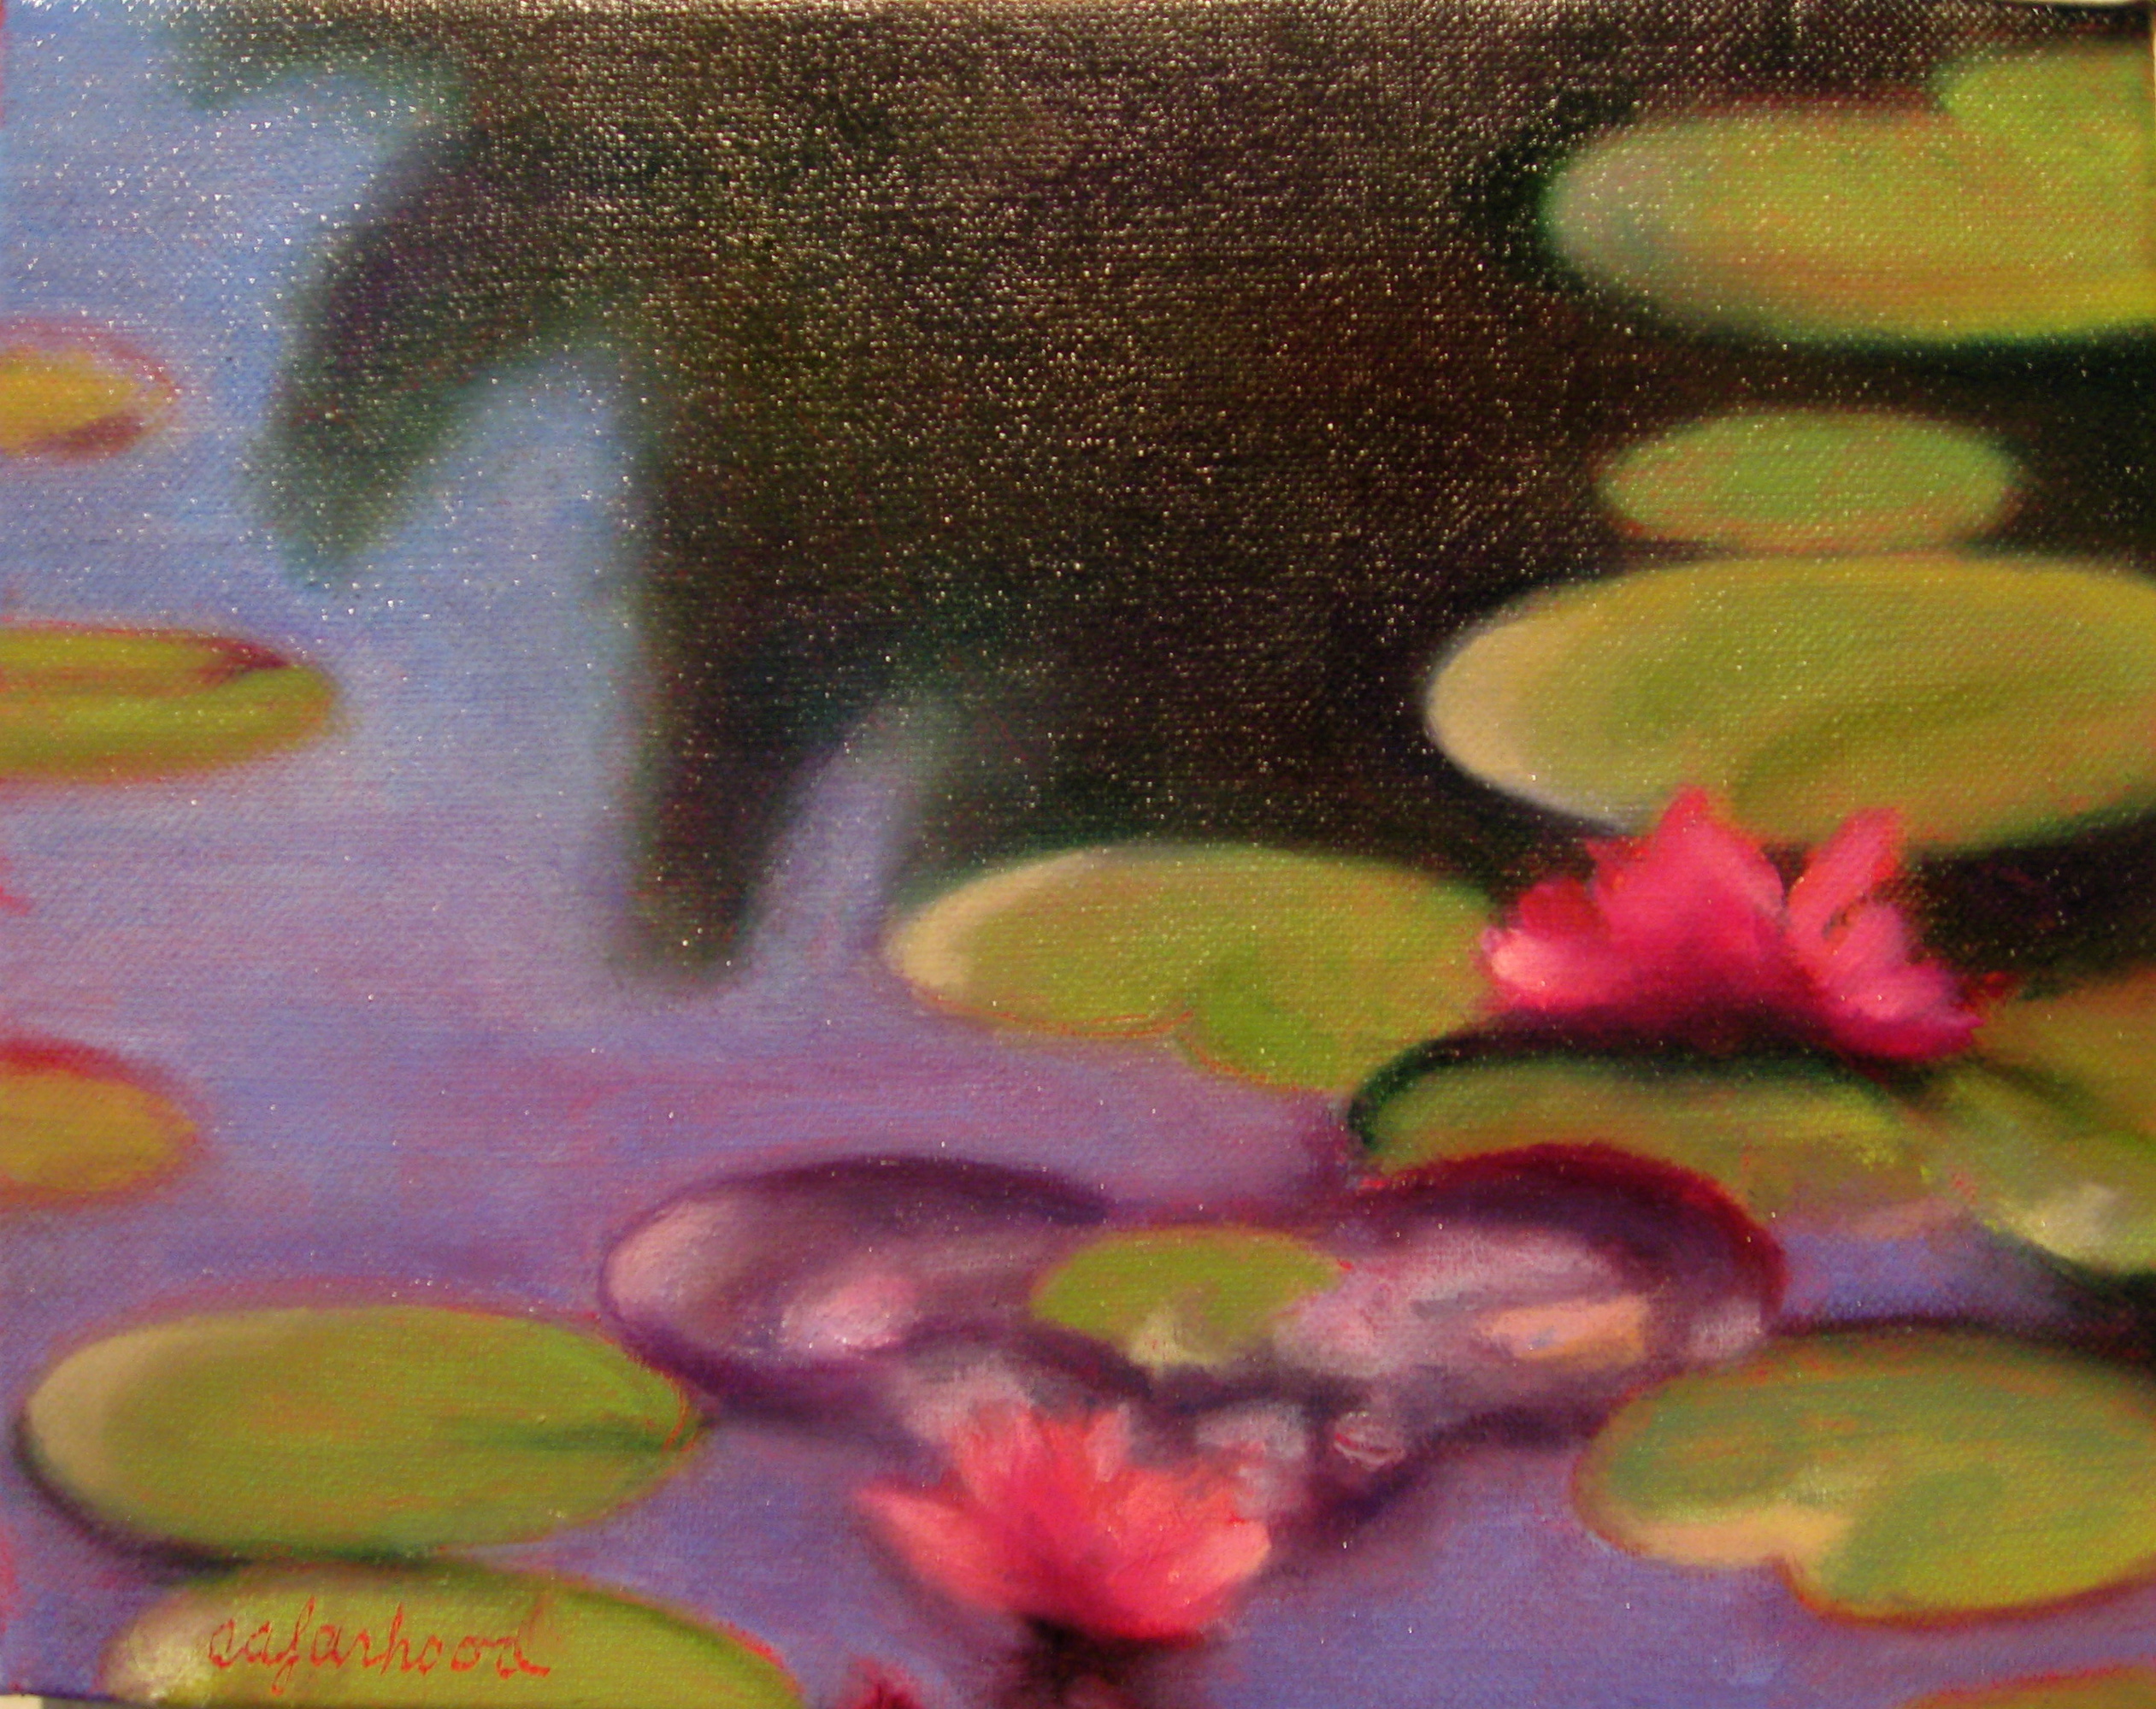 Waterlily 4